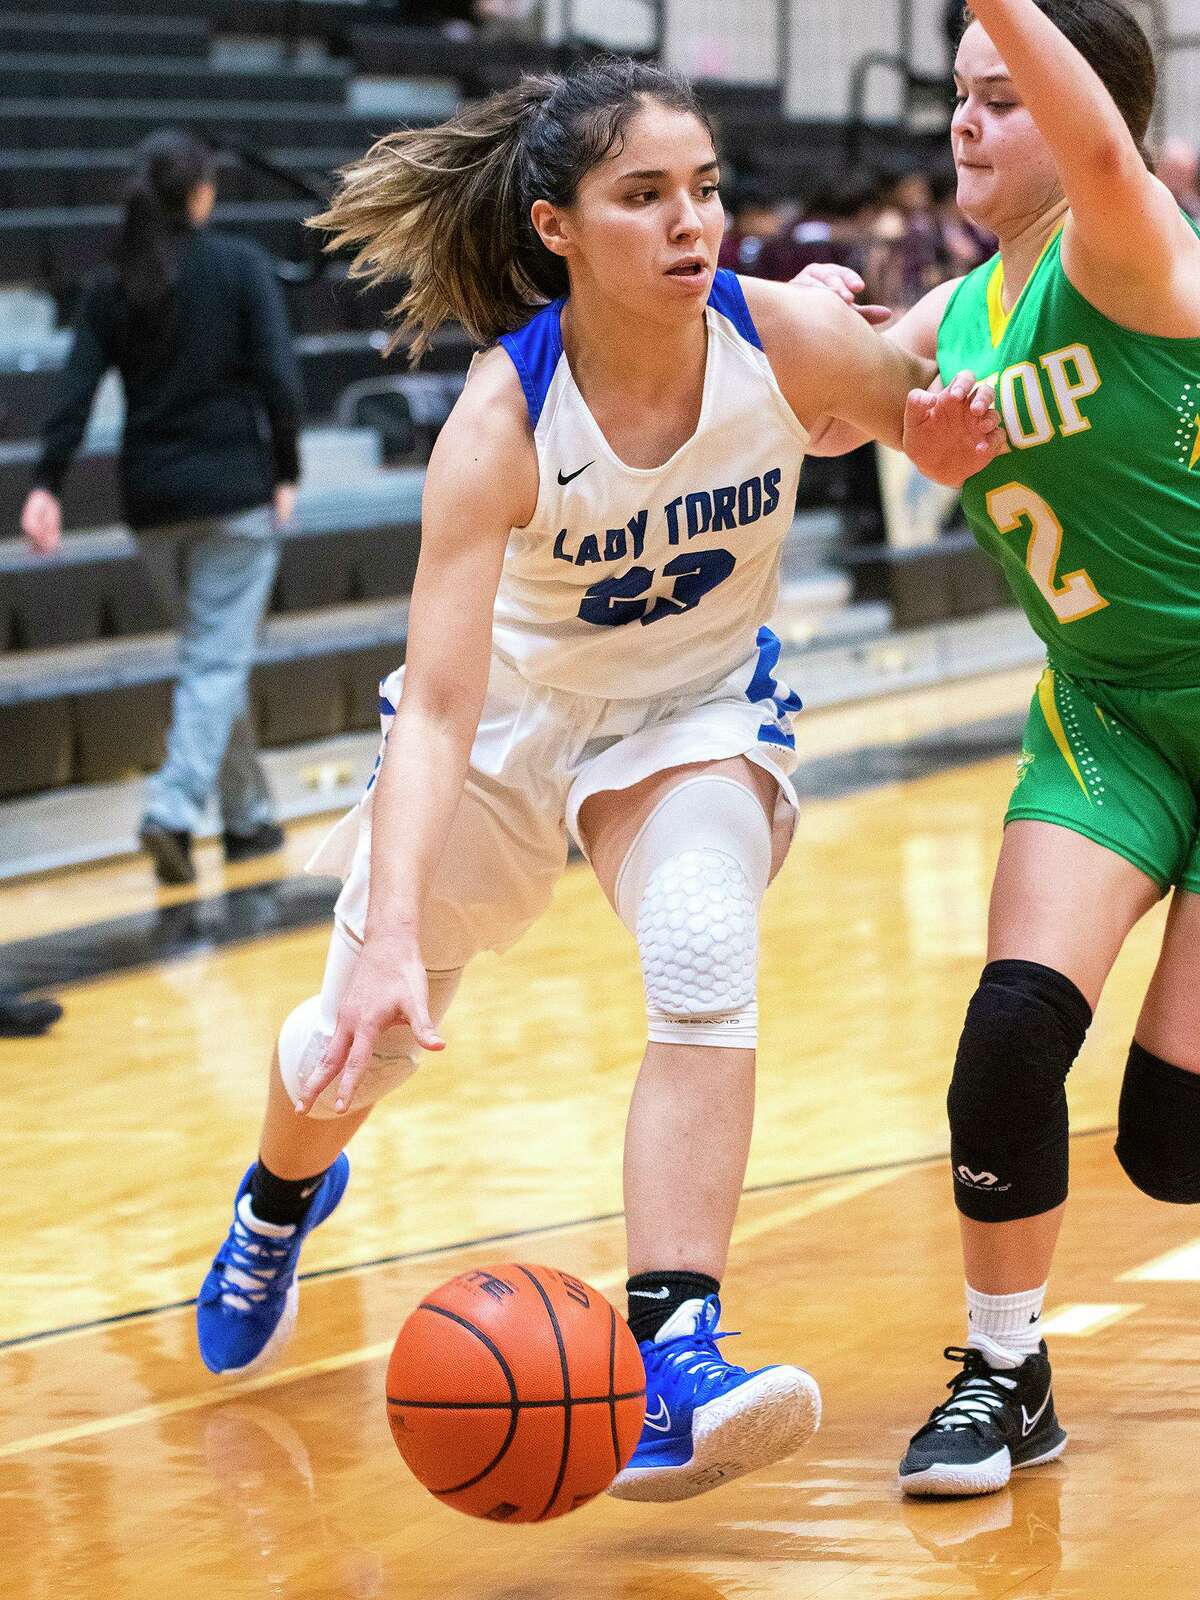 Pictured in this file photo, Cigarroa High School’s Brianna Mariscal had 11 points and eight rebounds Tuesday.